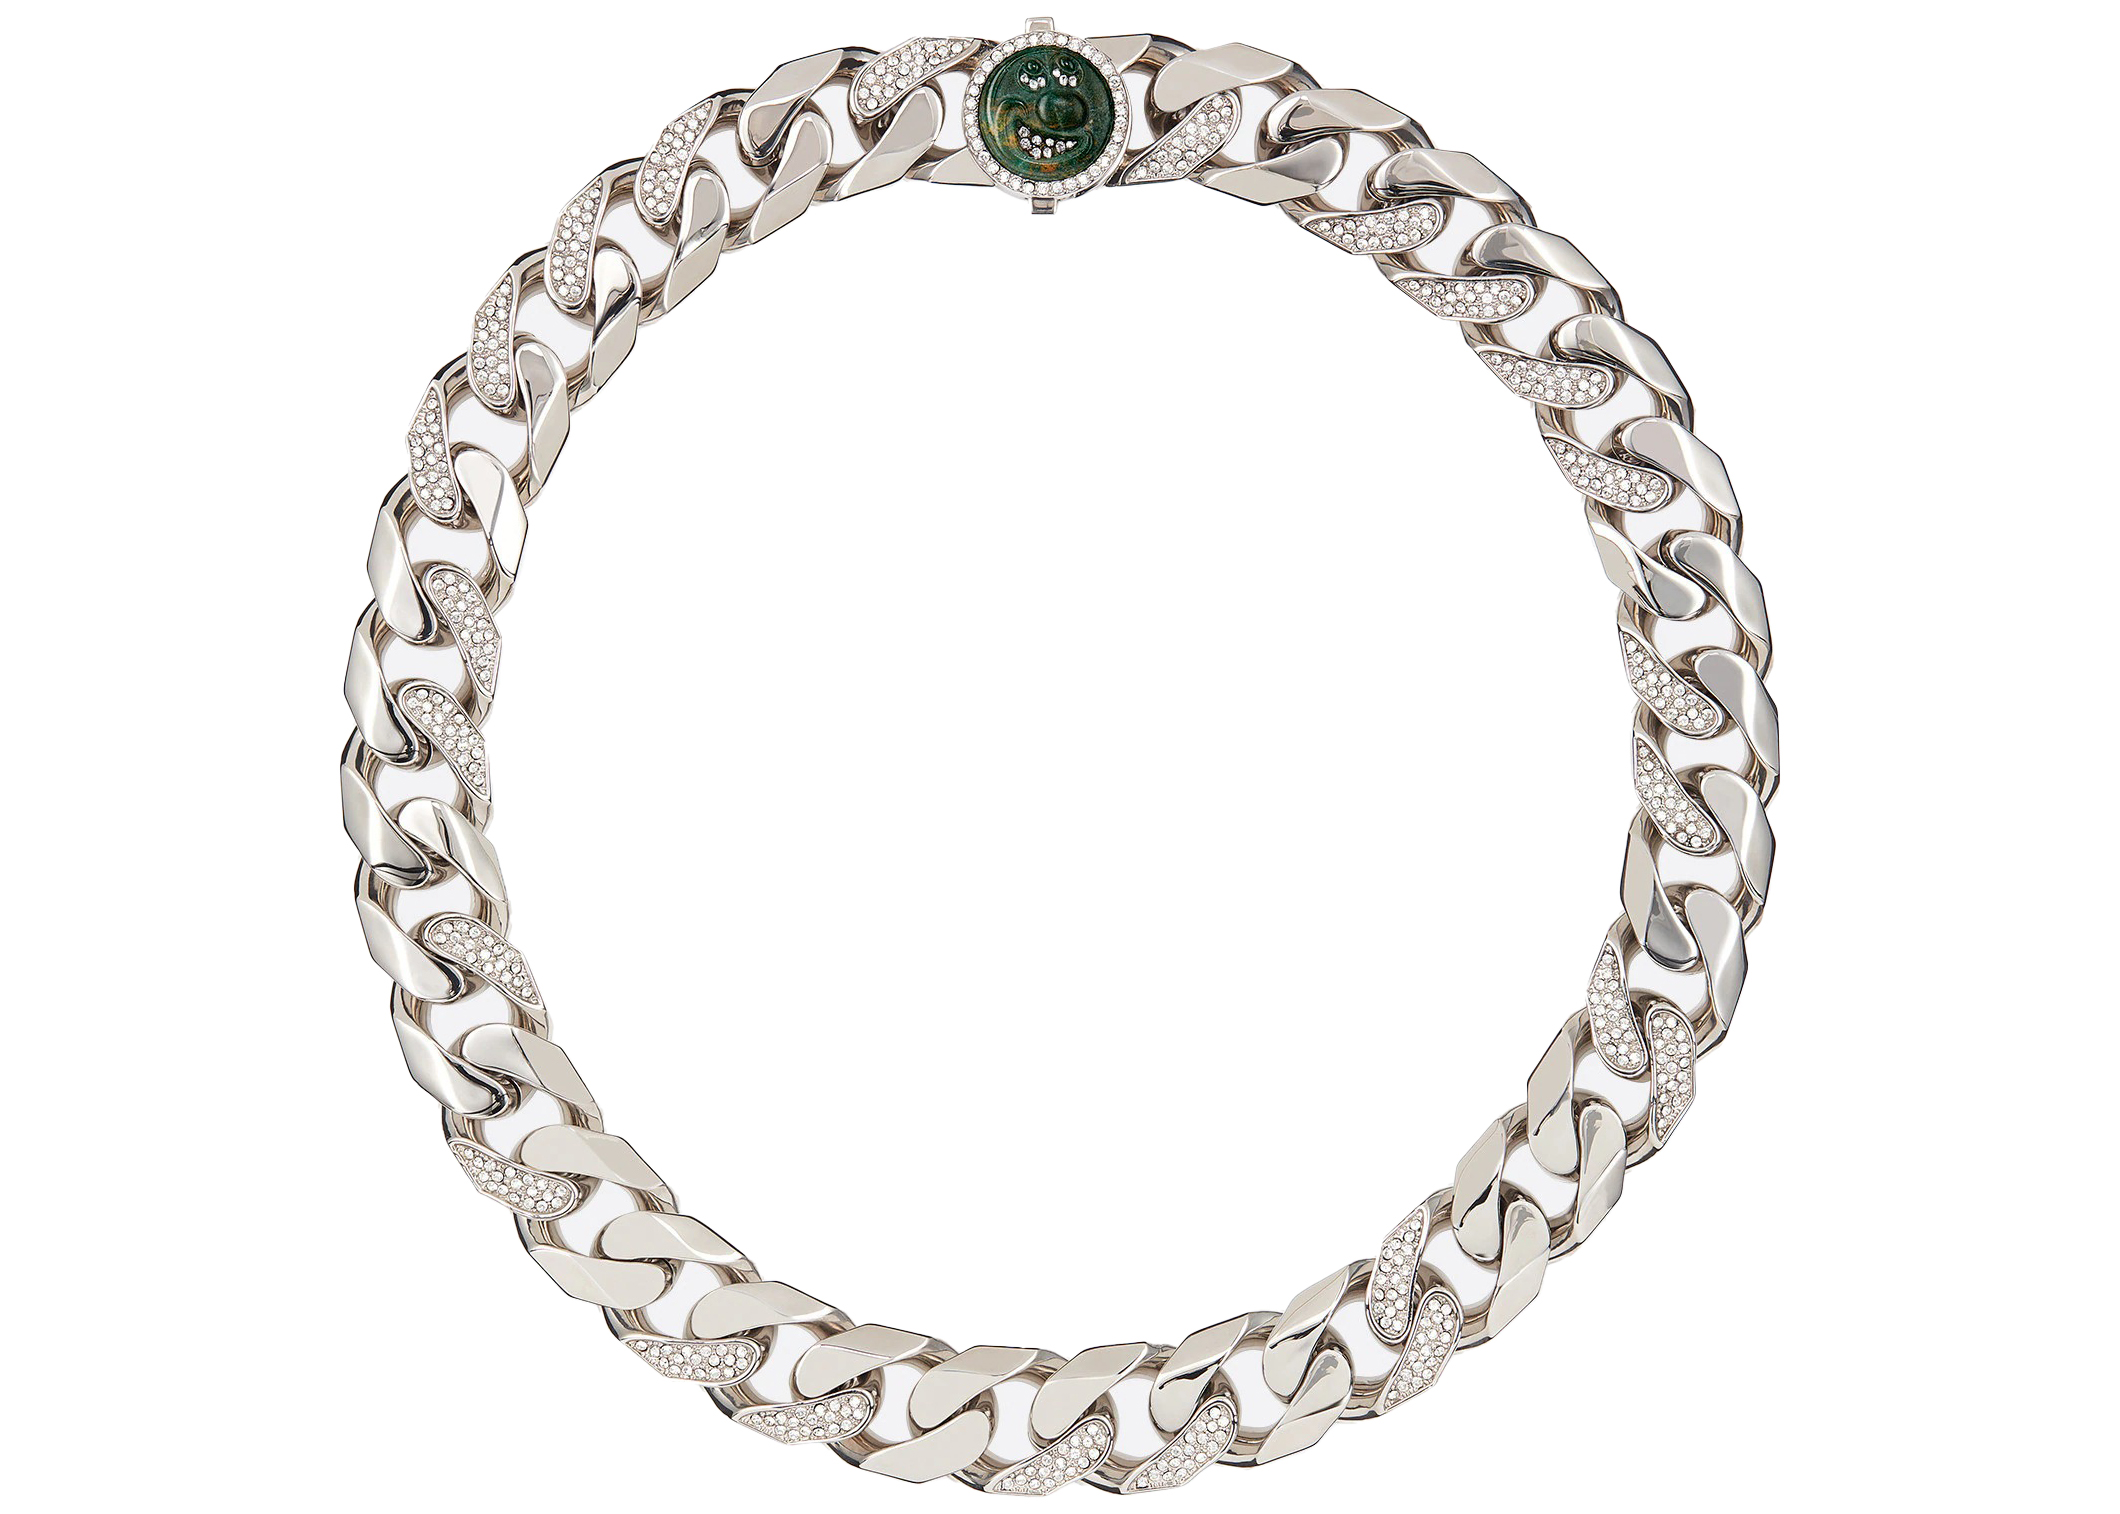 Dior x Kenny Scharf Jade Stone and White Crystal Necklace Silver ...